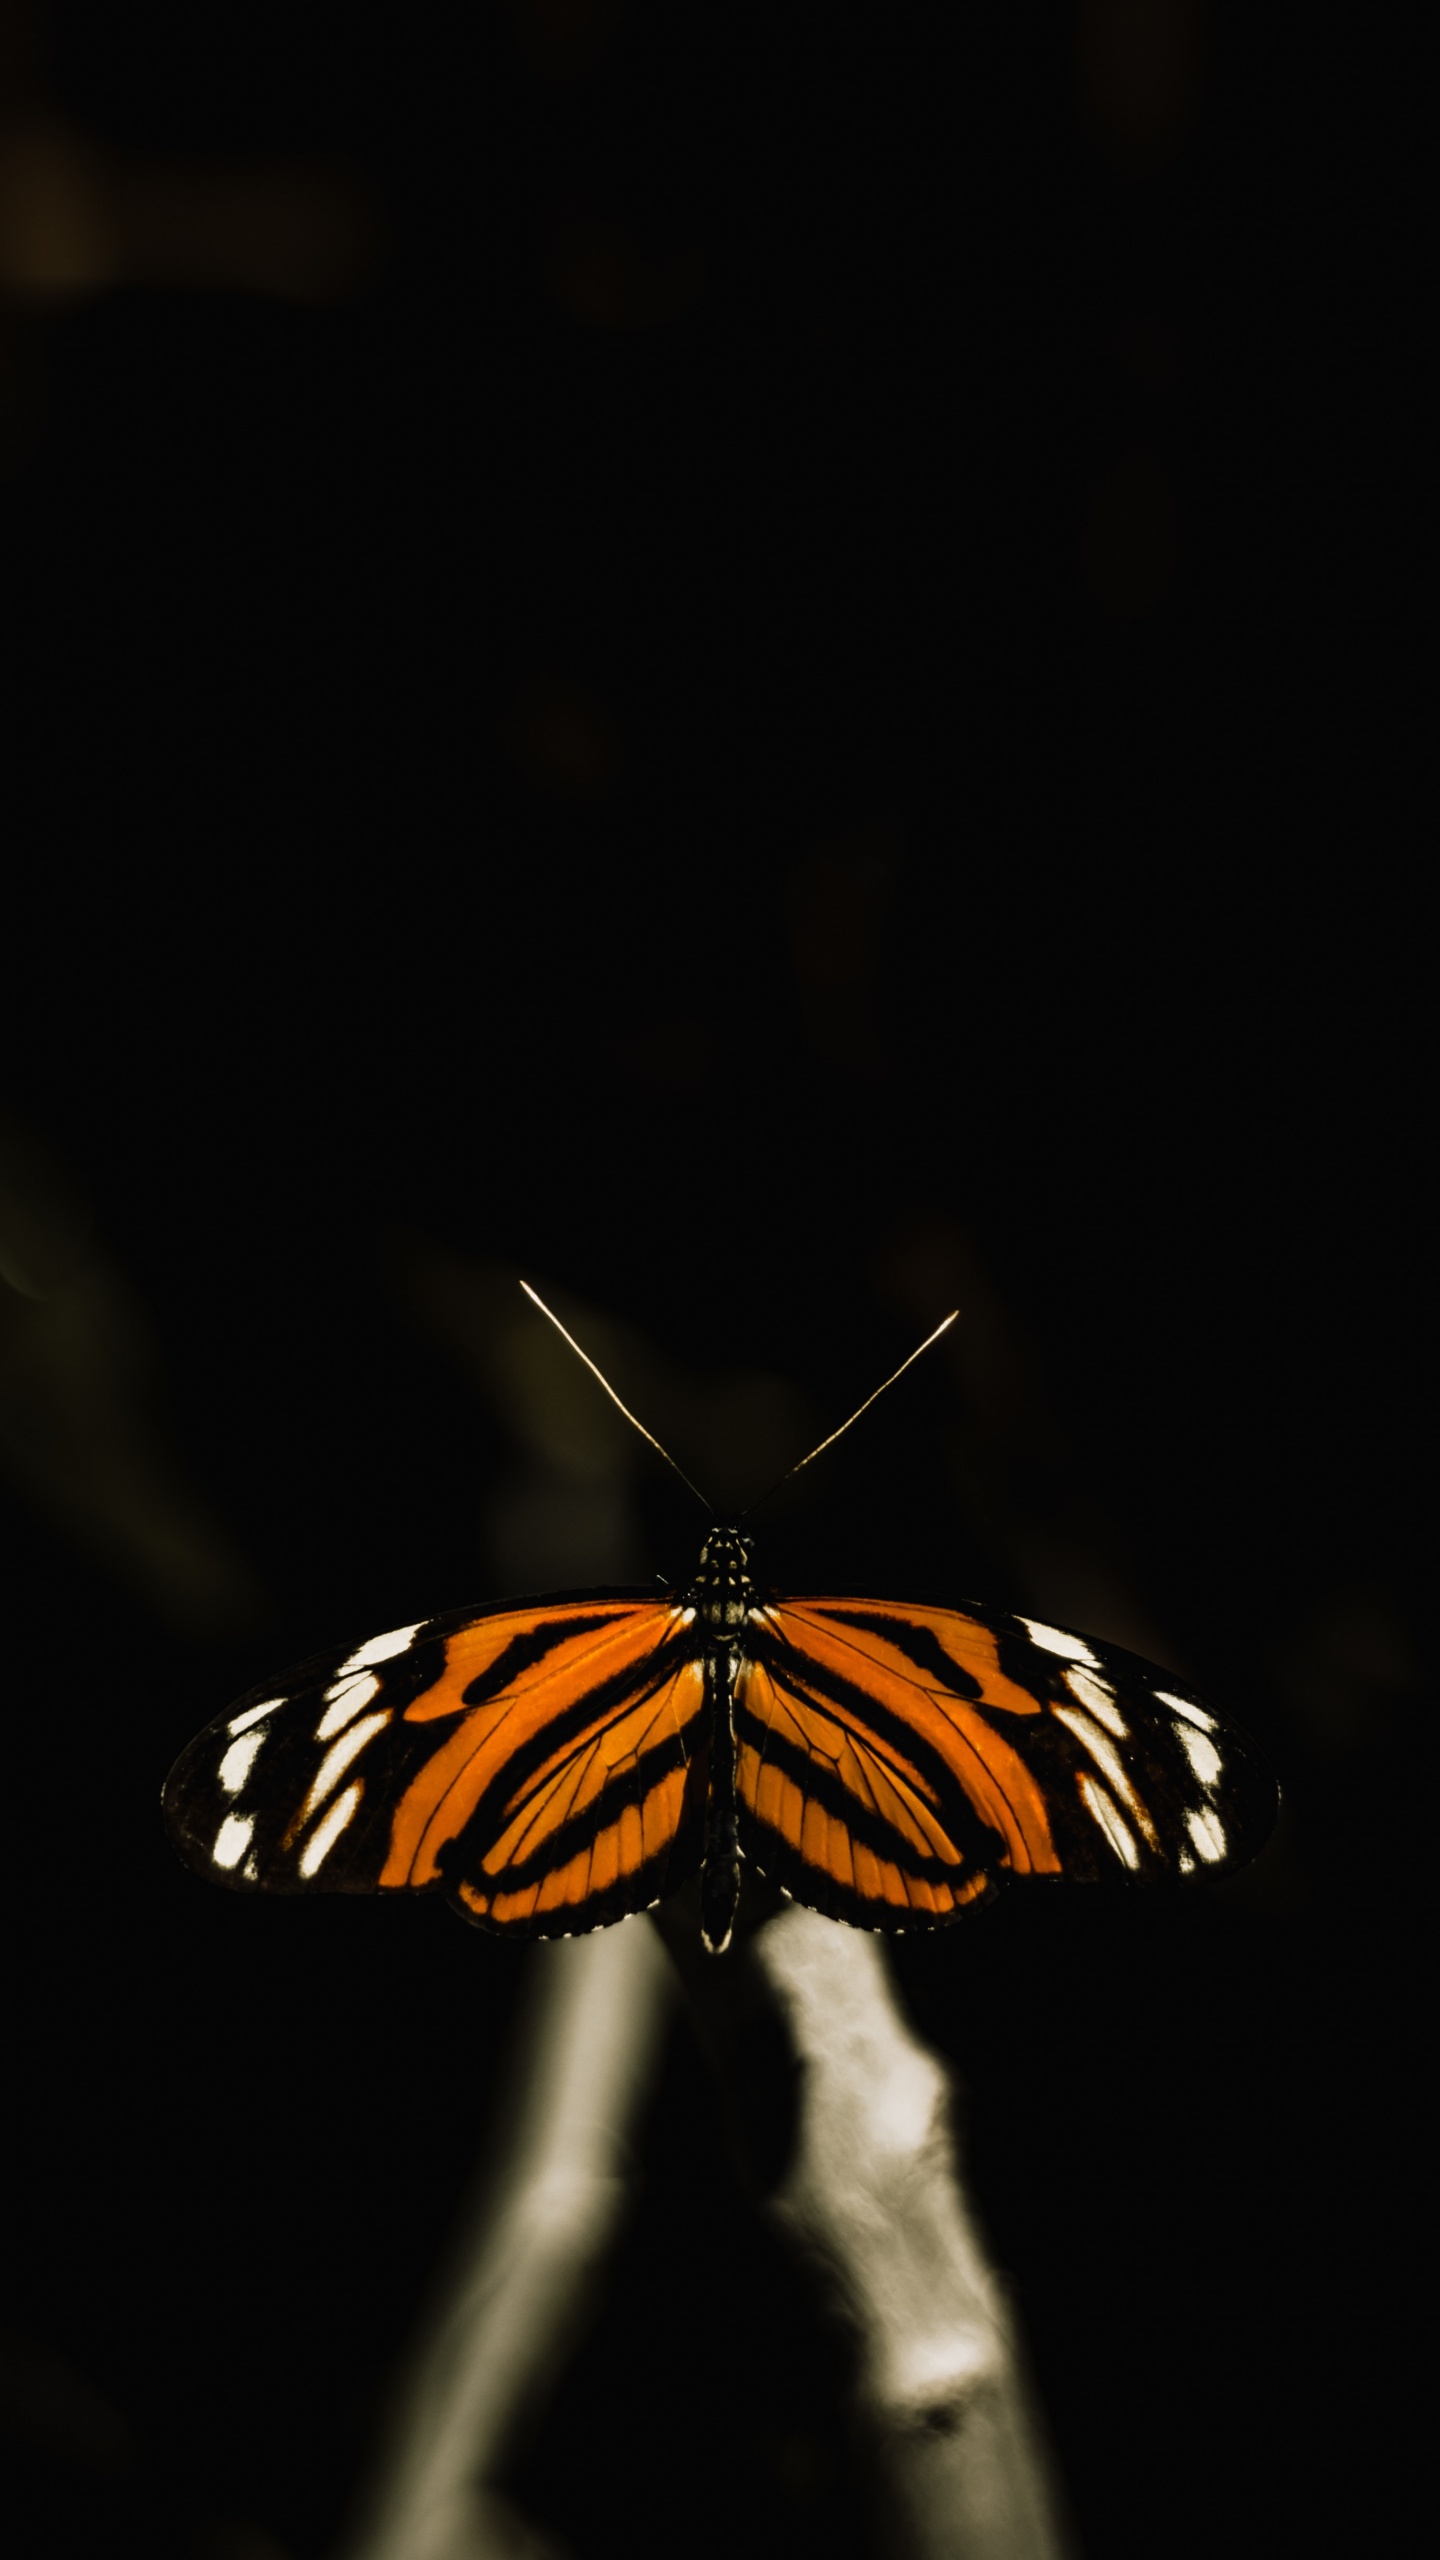 Black and White Butterfly on Black Background. Wallpaper in 1440x2560 Resolution